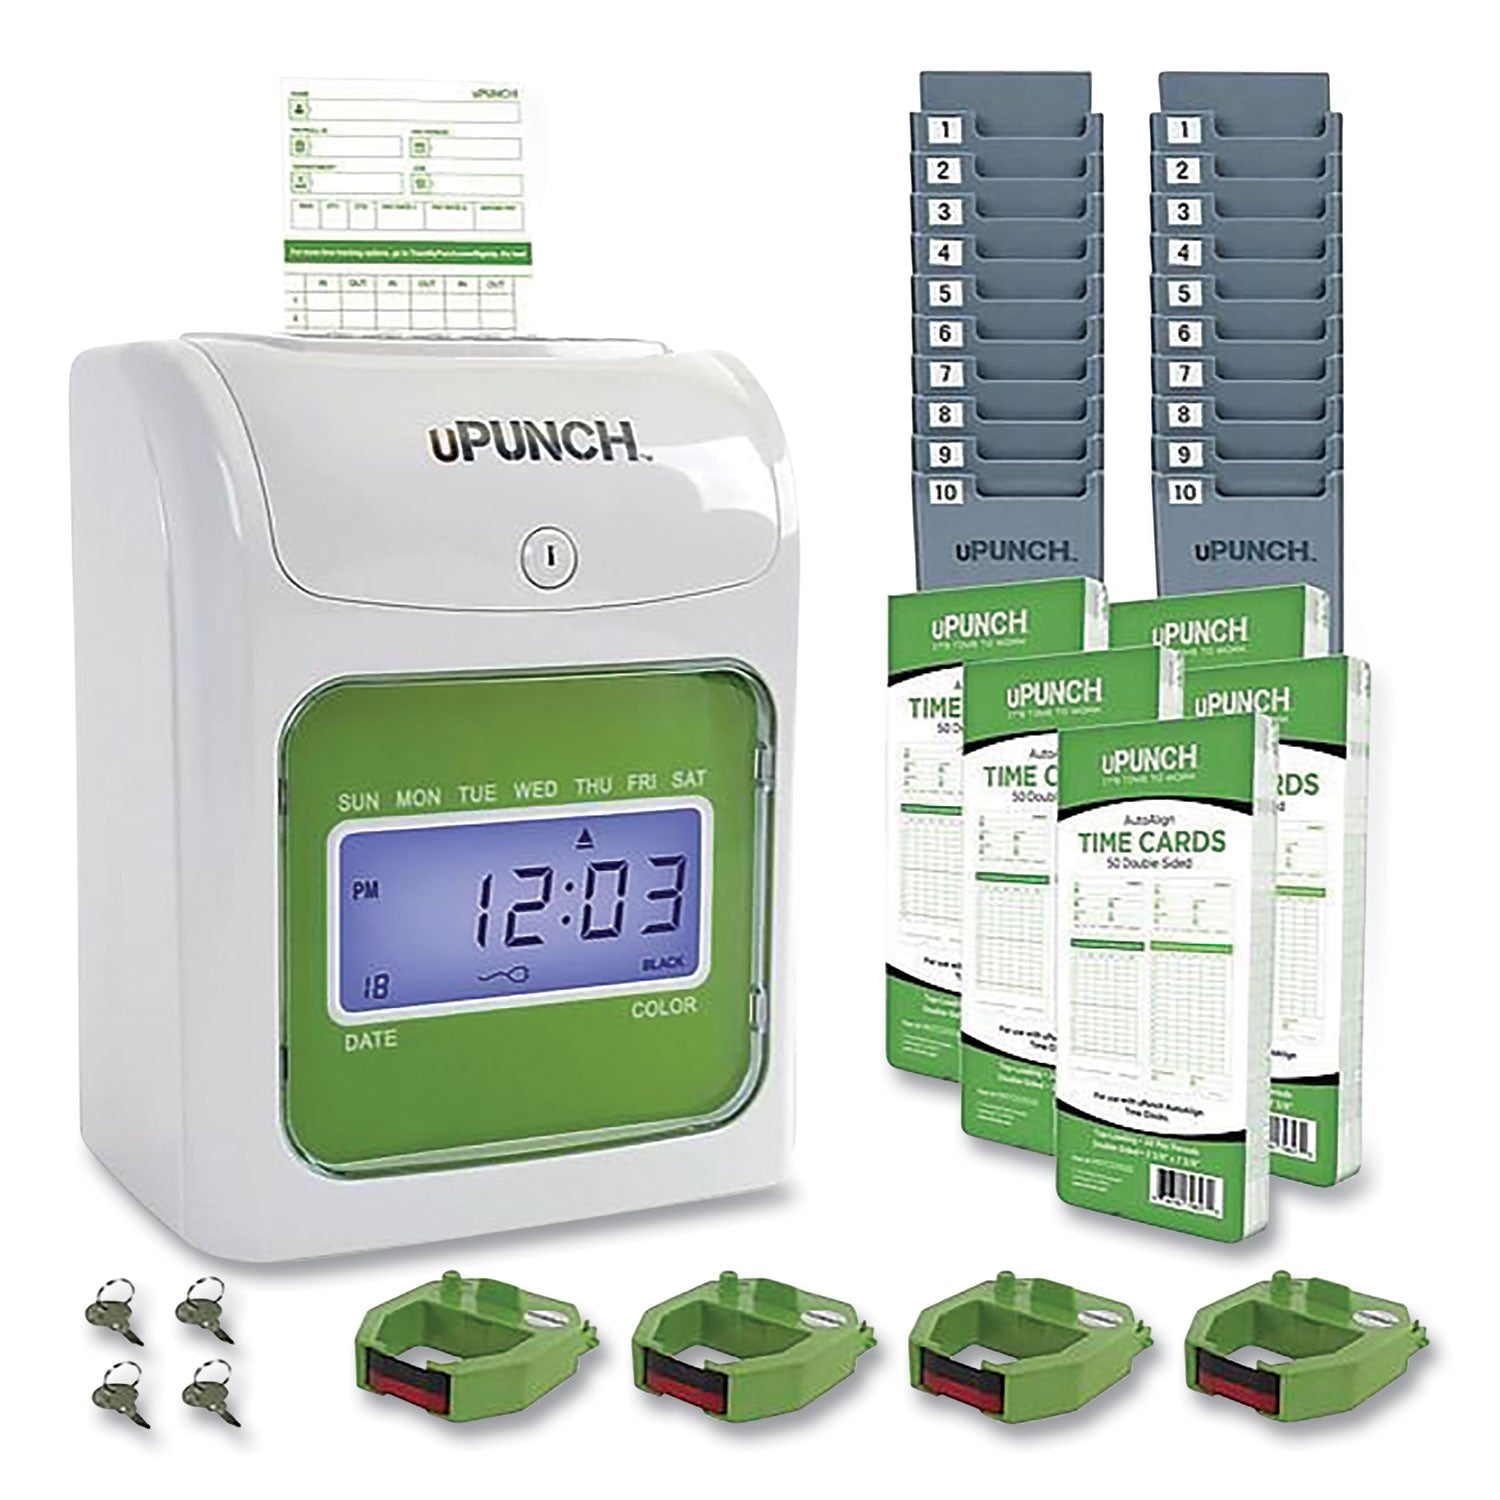 ub1000-electronic-non-calculating-time-clock-bundle-lcd-display-beige-green_ppzub1000 - 1